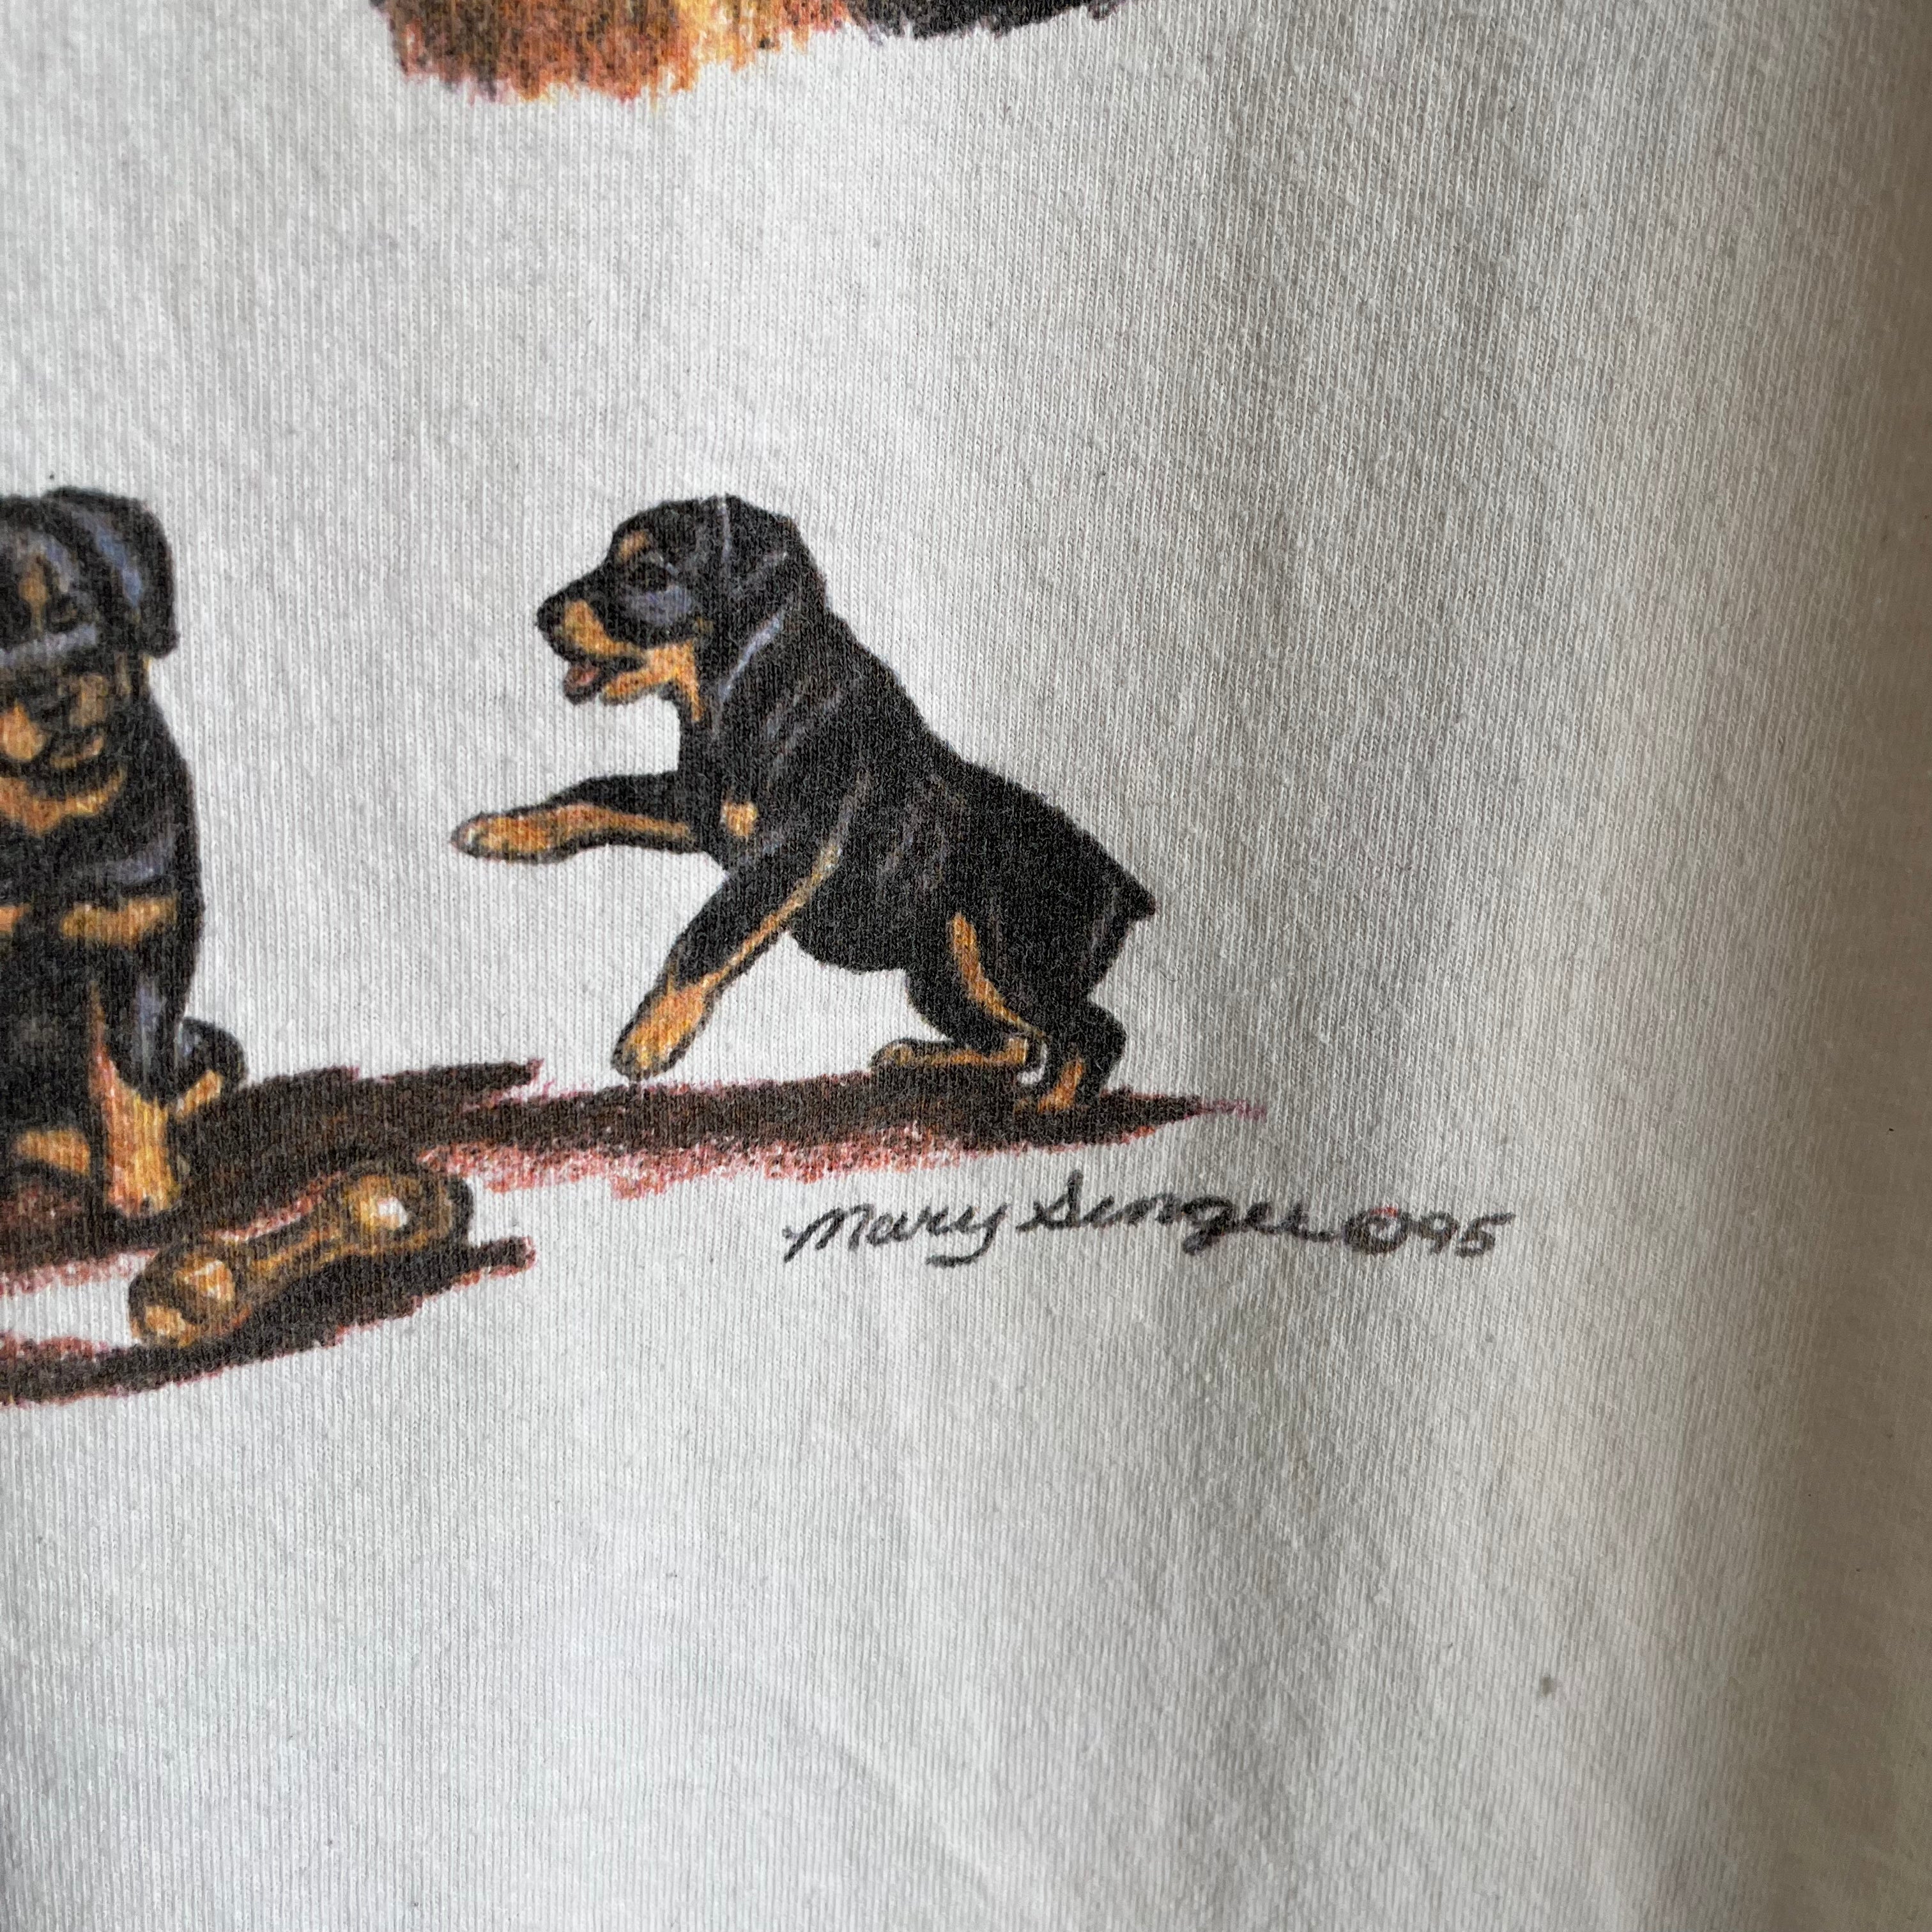 1995 Rottie Good Boy and Girl Stained Cotton T-Shirt - Fabriqué au Canada